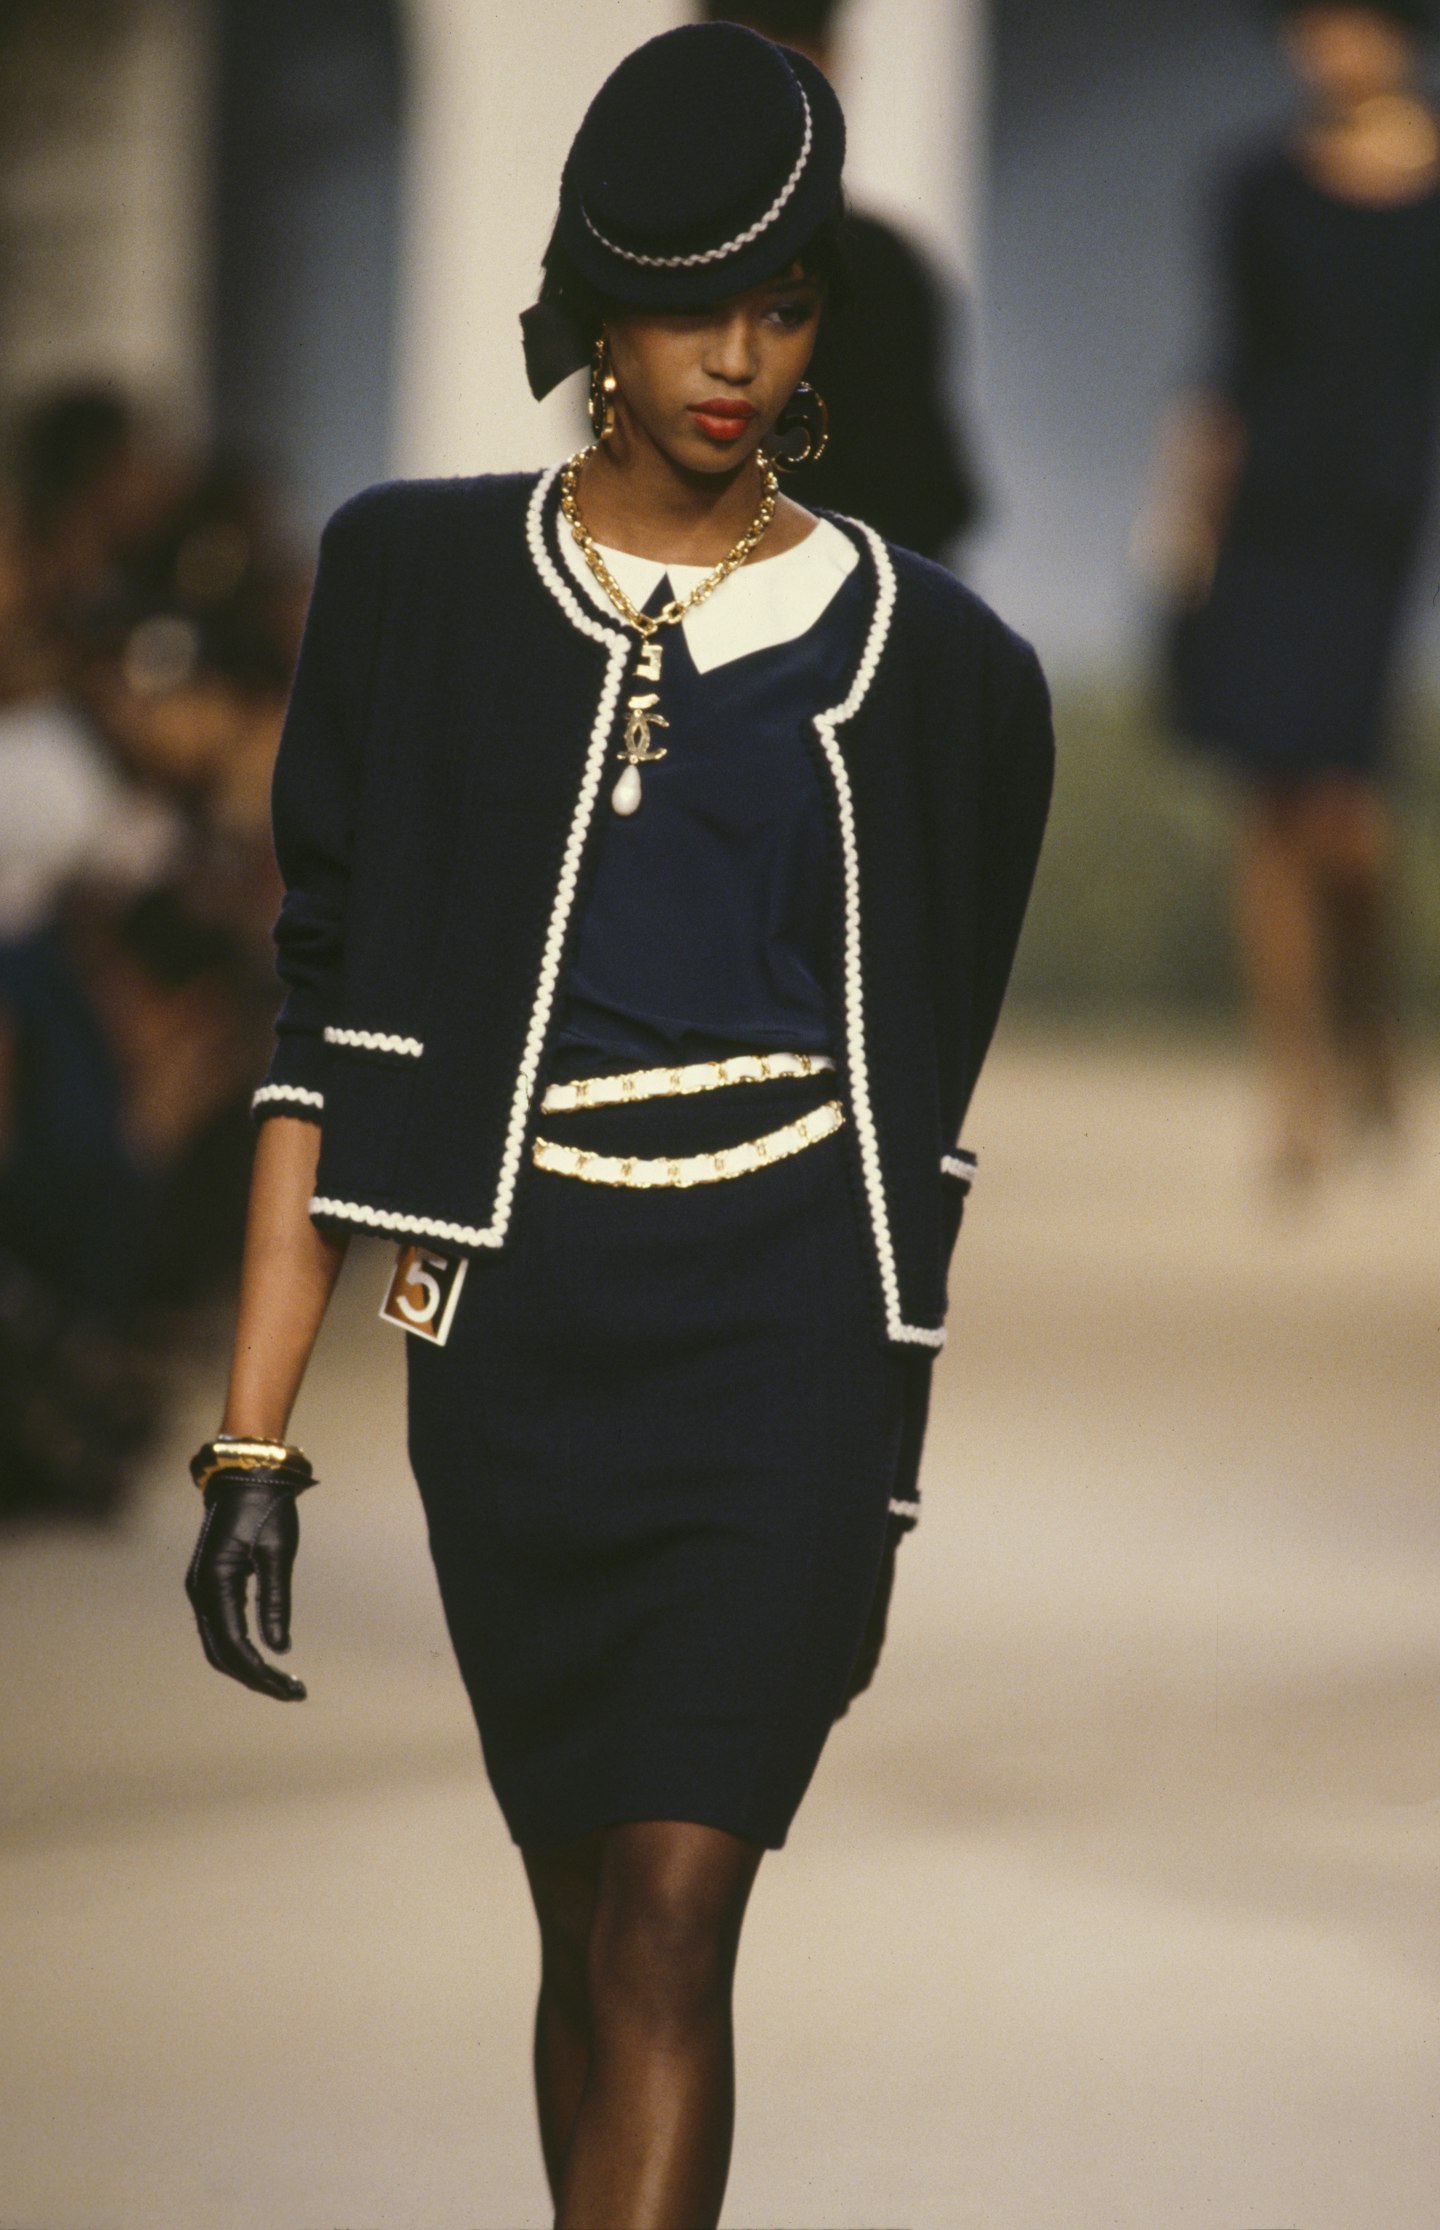 Chanel exhibition catwalk moments  Naomi Campbell for Chanel 1987